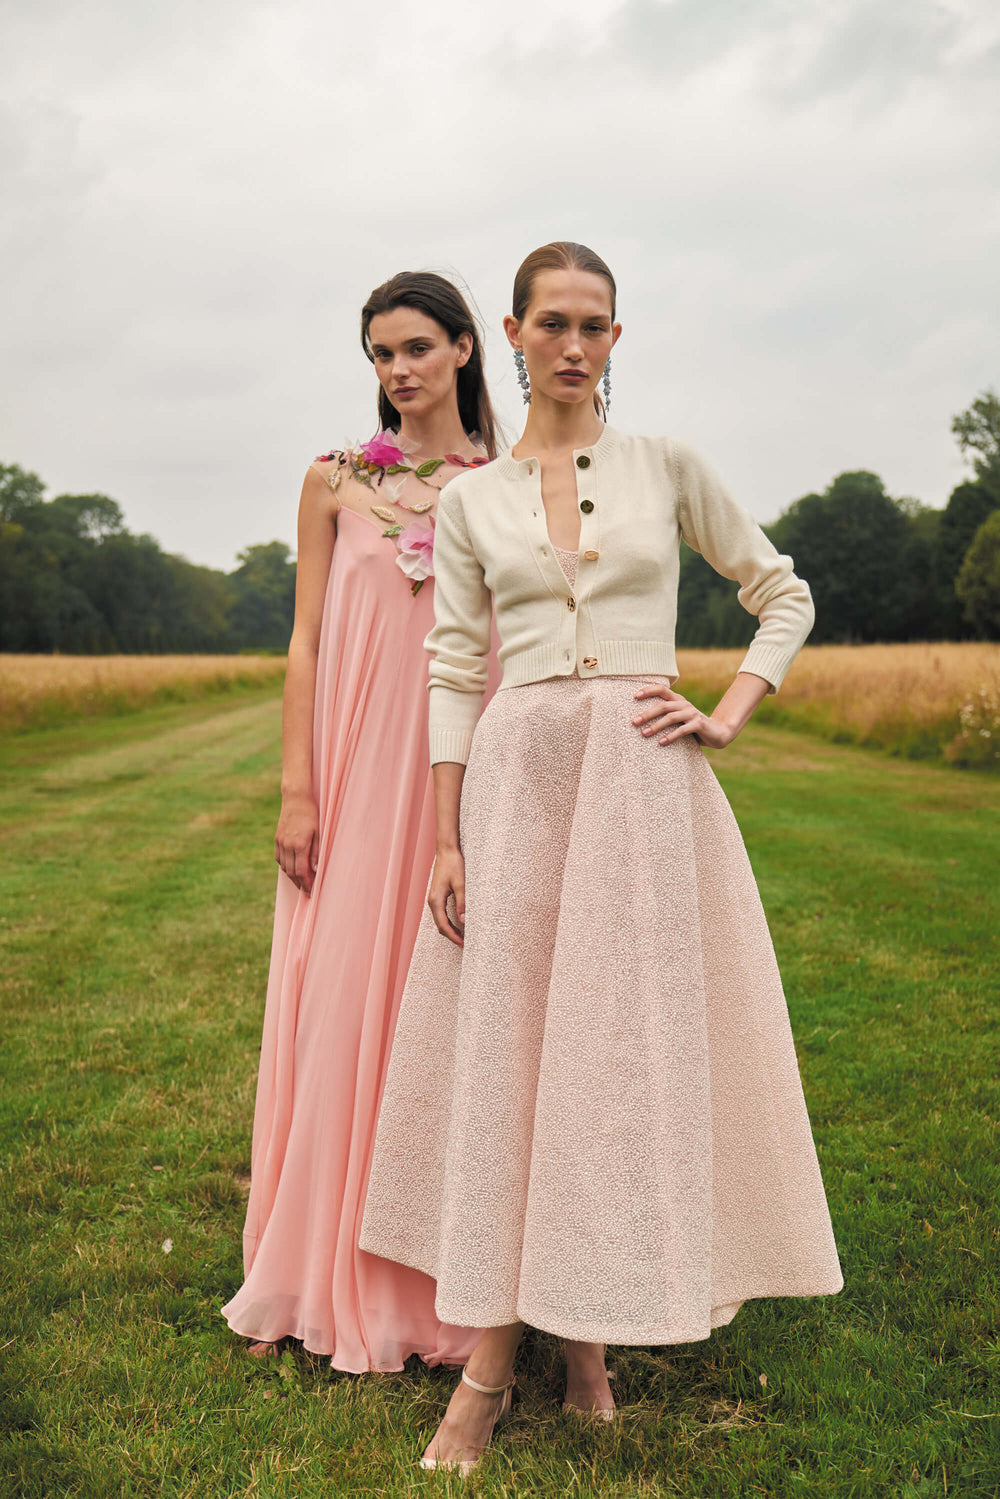 Monique Lhuillier Spring 2024 Melon chiffon caftan gown with floral 3-D embroidery over an illusion tulle neckline next to a powder pink strapless cocktail dress in a field.